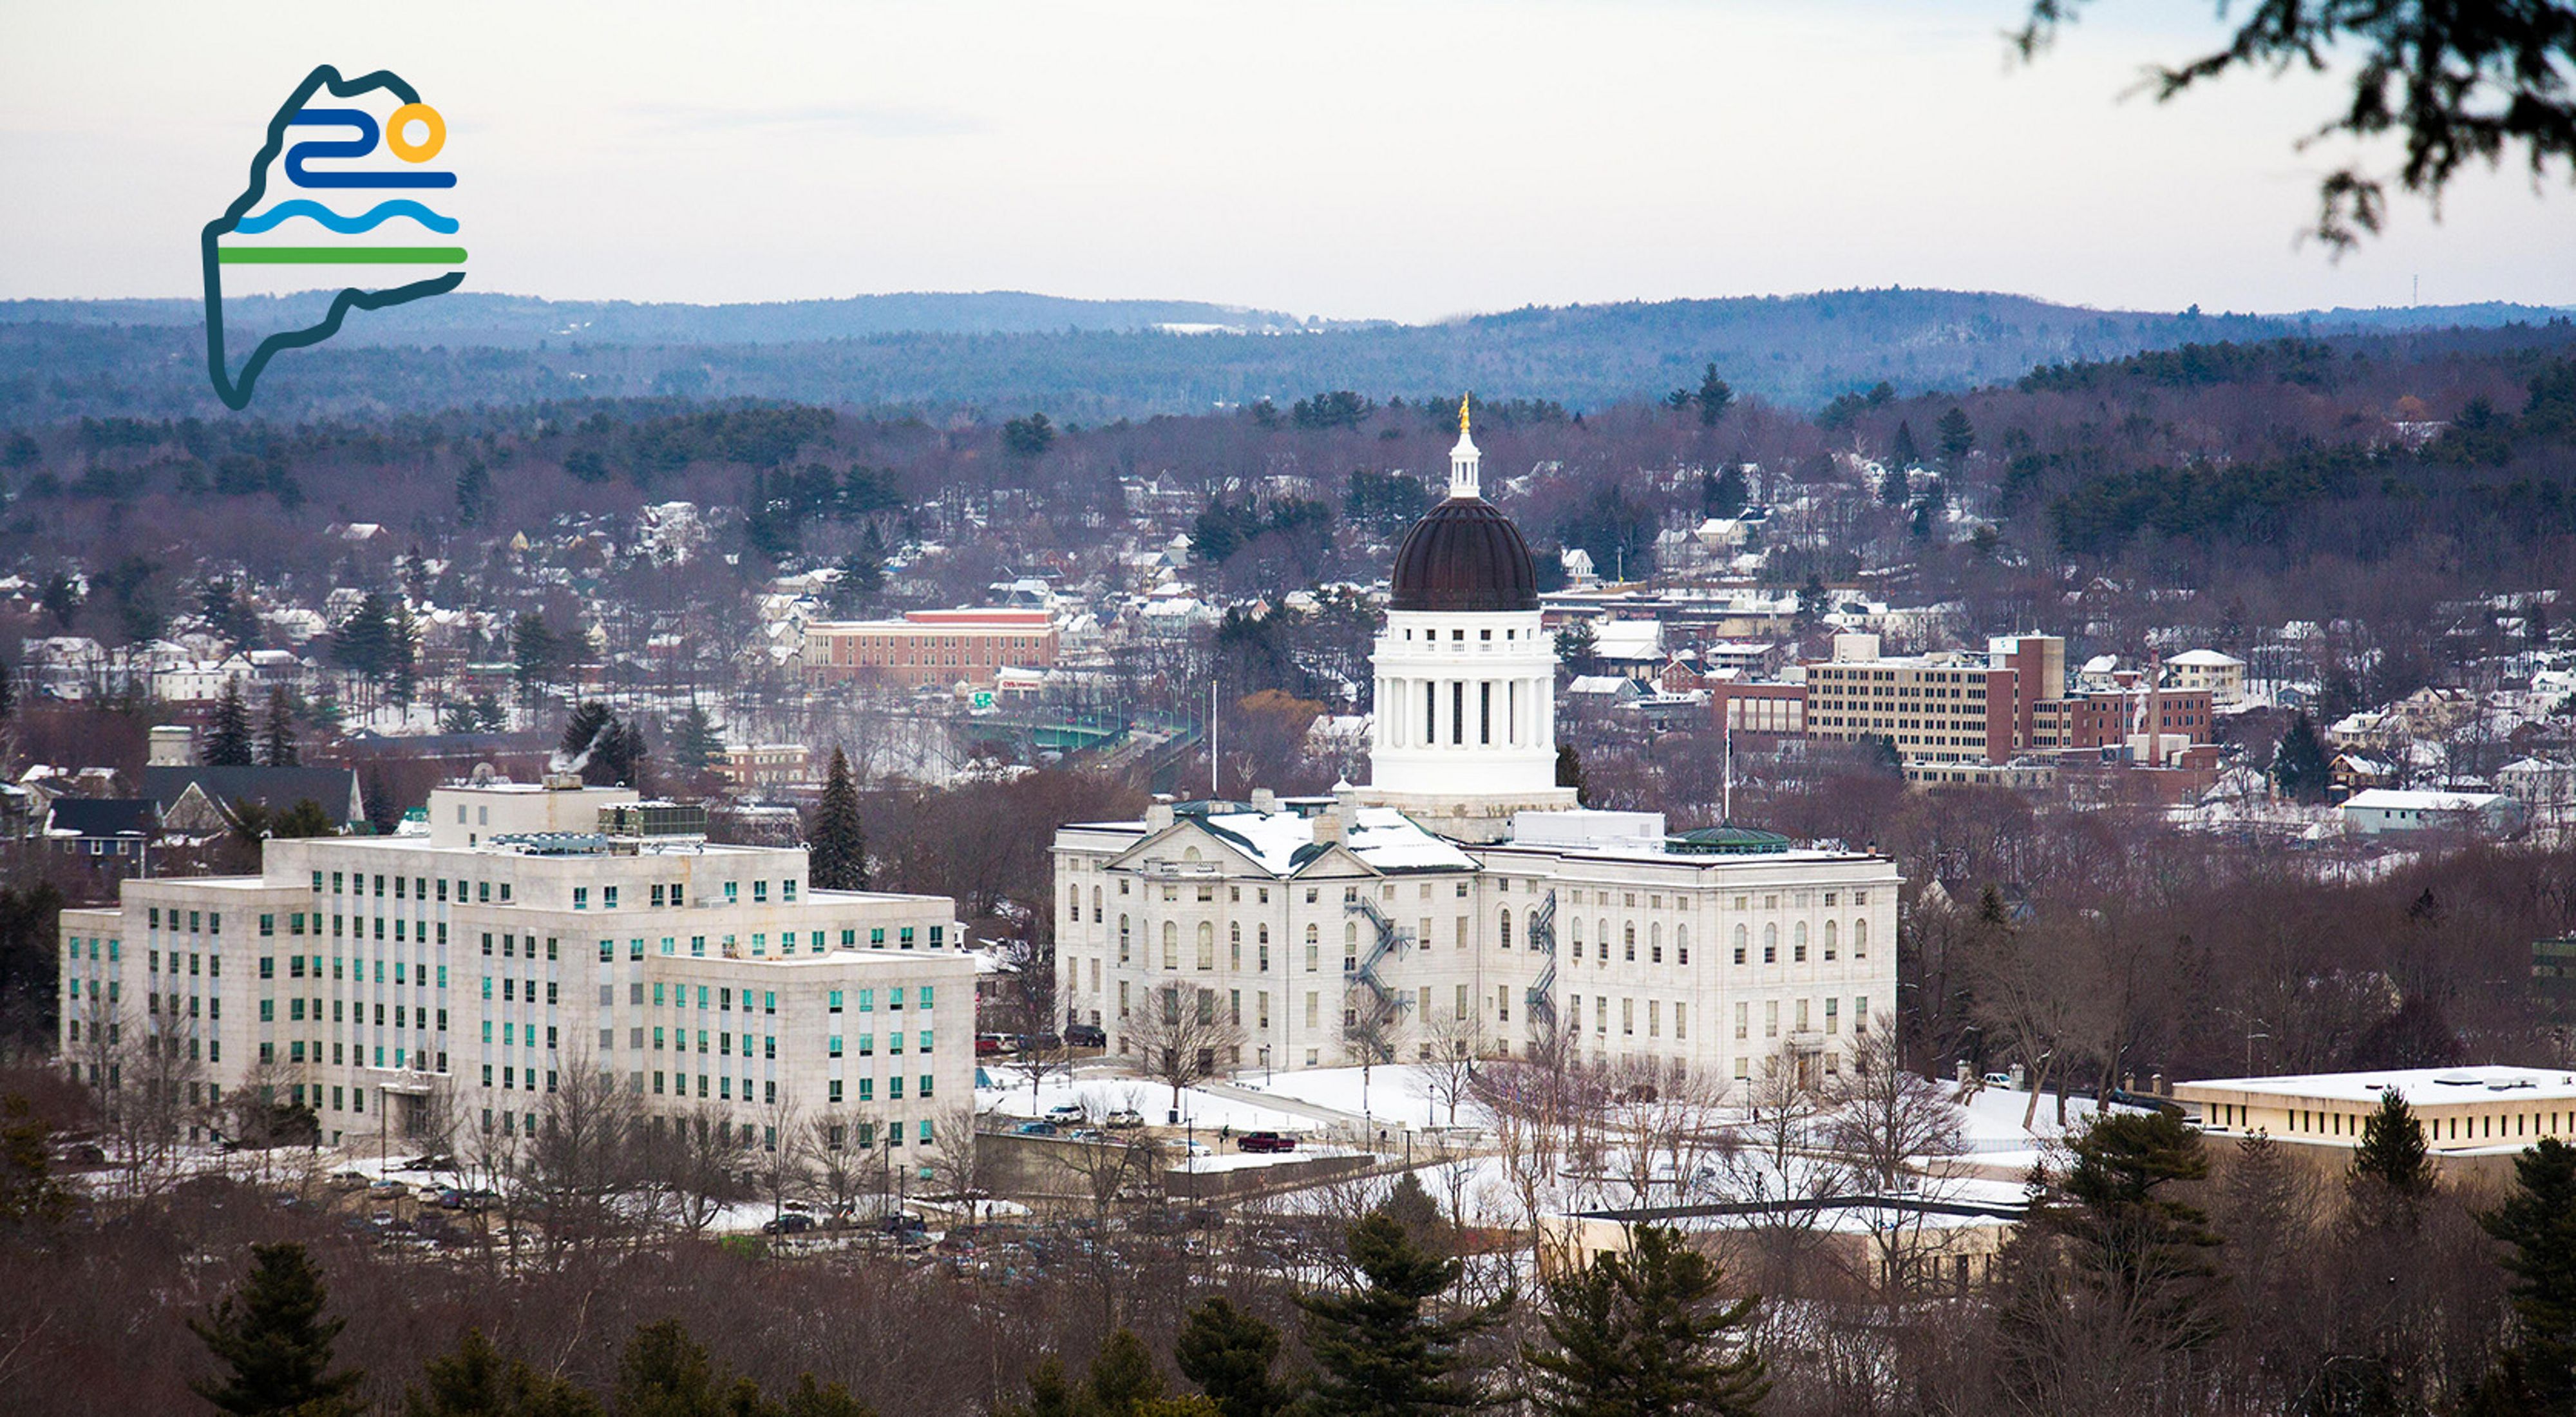 A view of the Maine statehouse from a surrounding hill.